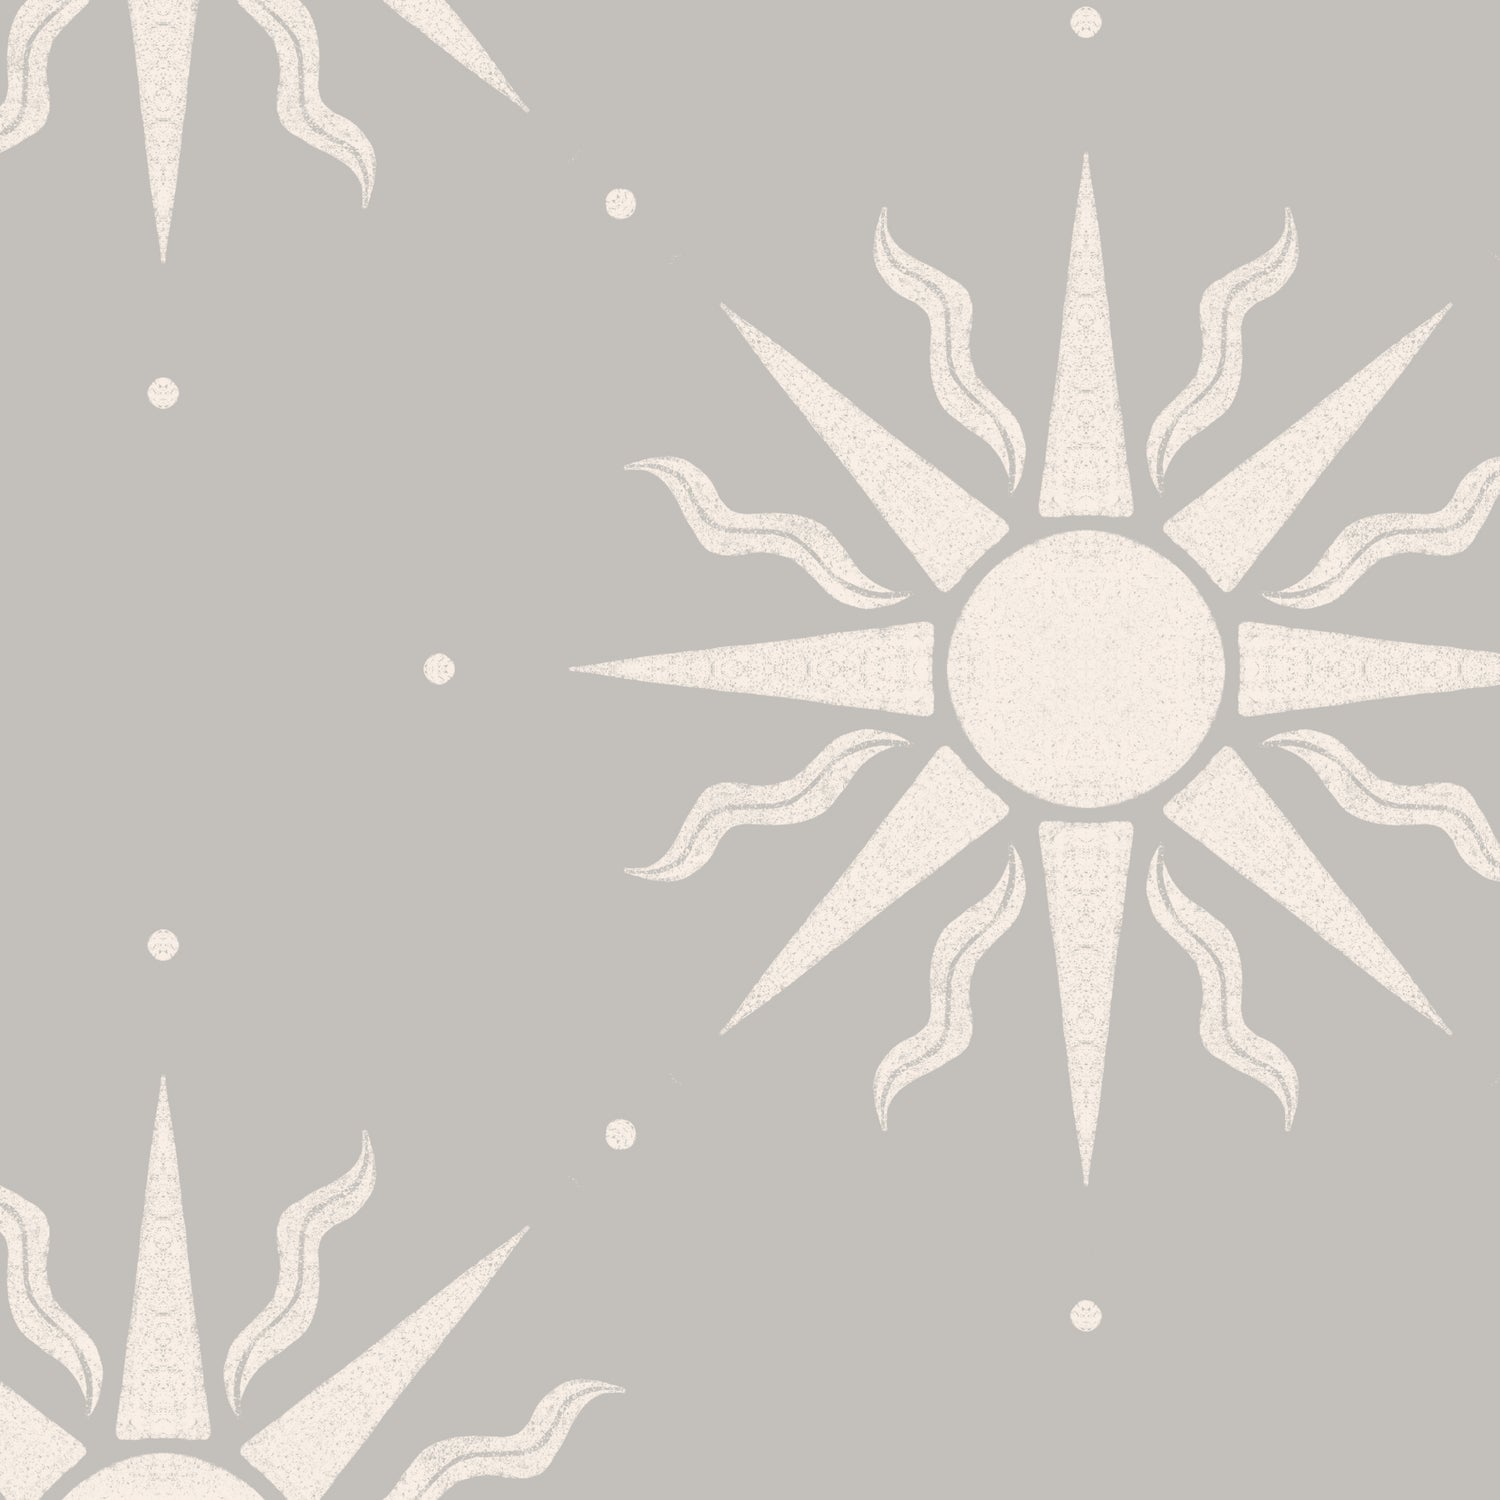 Sunny Suns Wallpaper in Gray shown in a close up view.